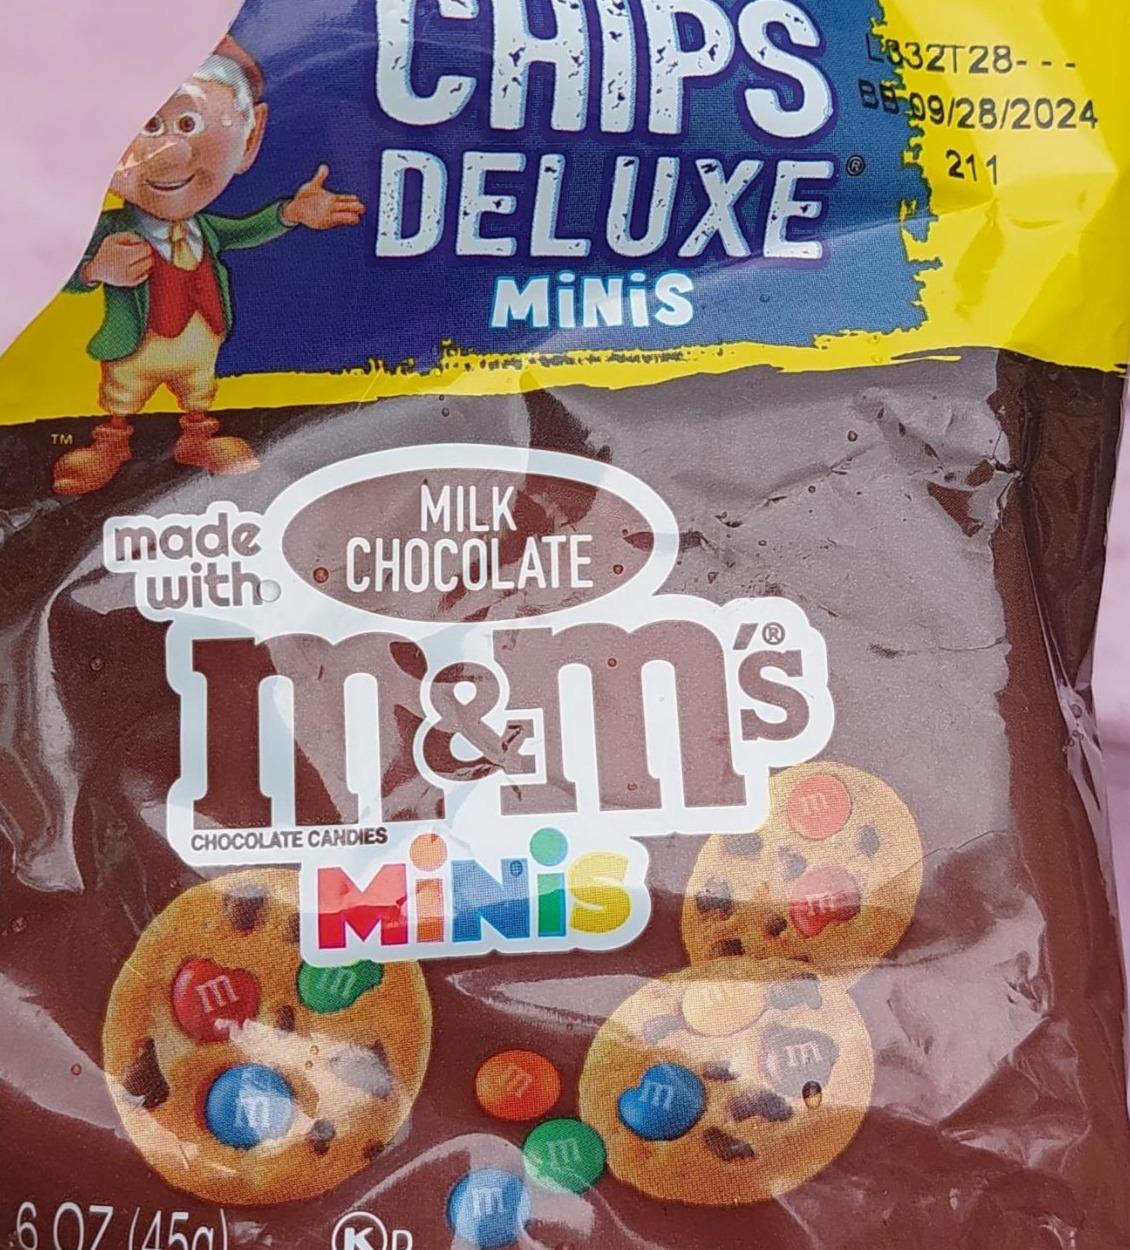 Fotografie - Chips deluxe minis made with milk chocolate M&M´s